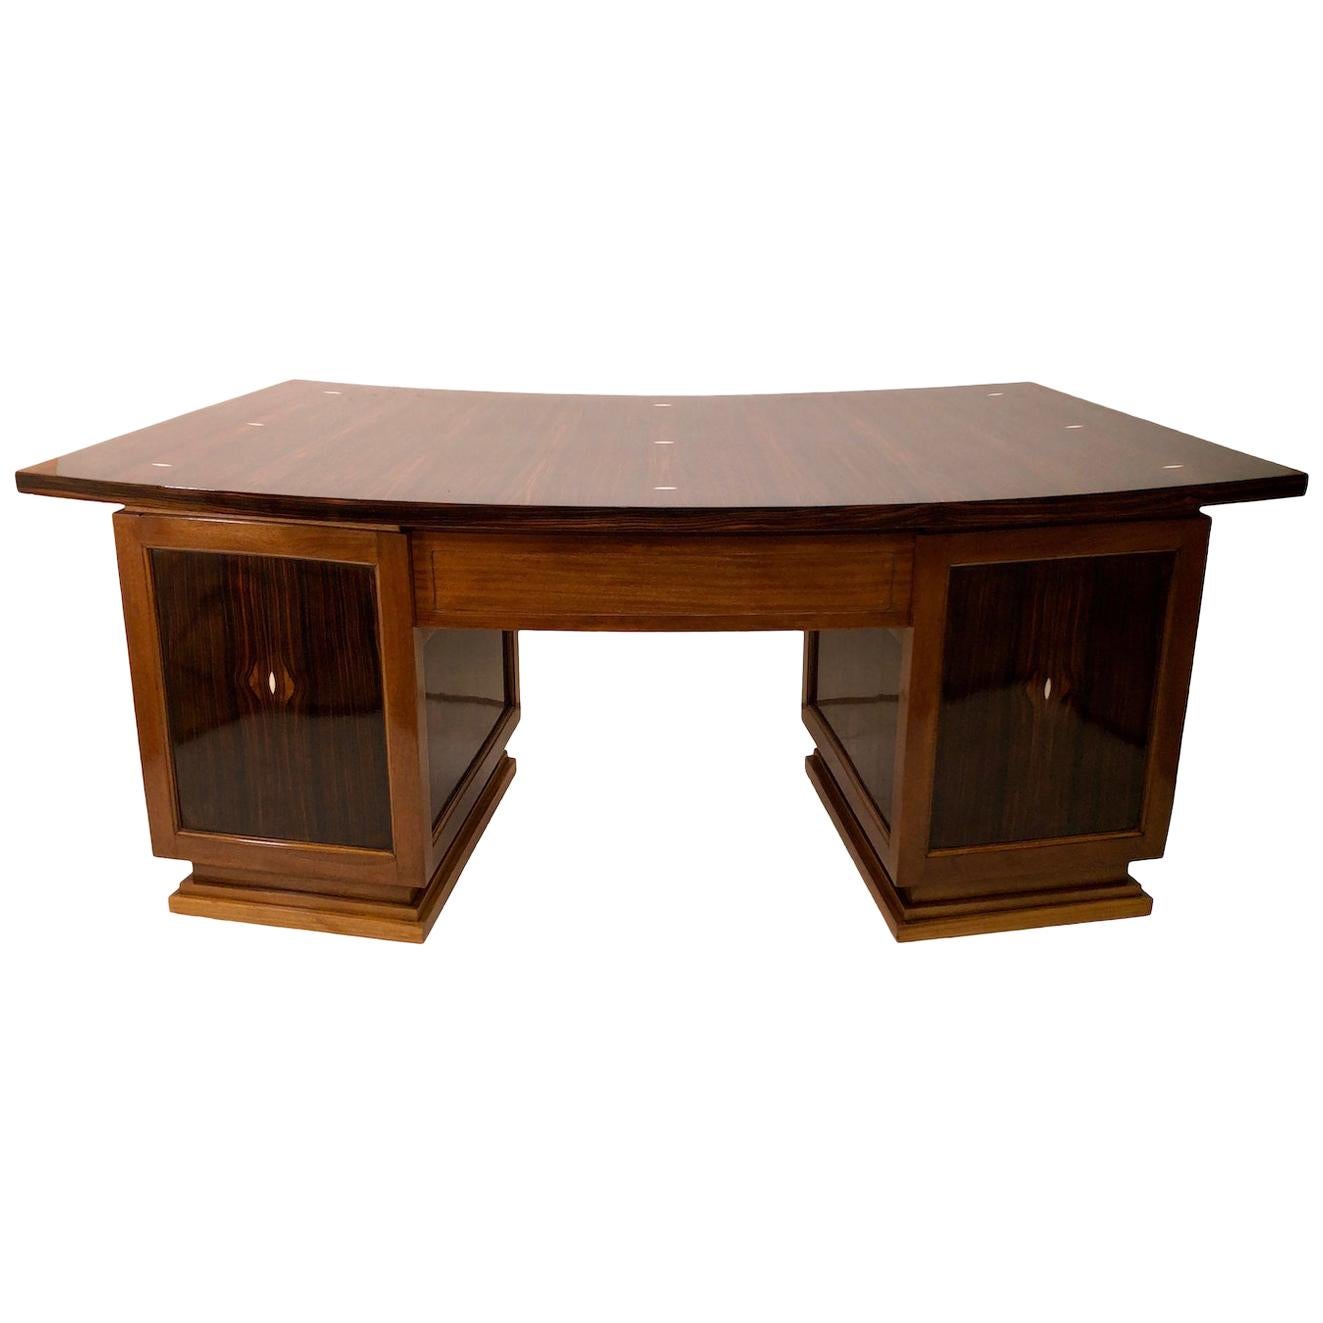 Curved Art Deco Desk in in Real Wood Veneer with Inlays For Sale